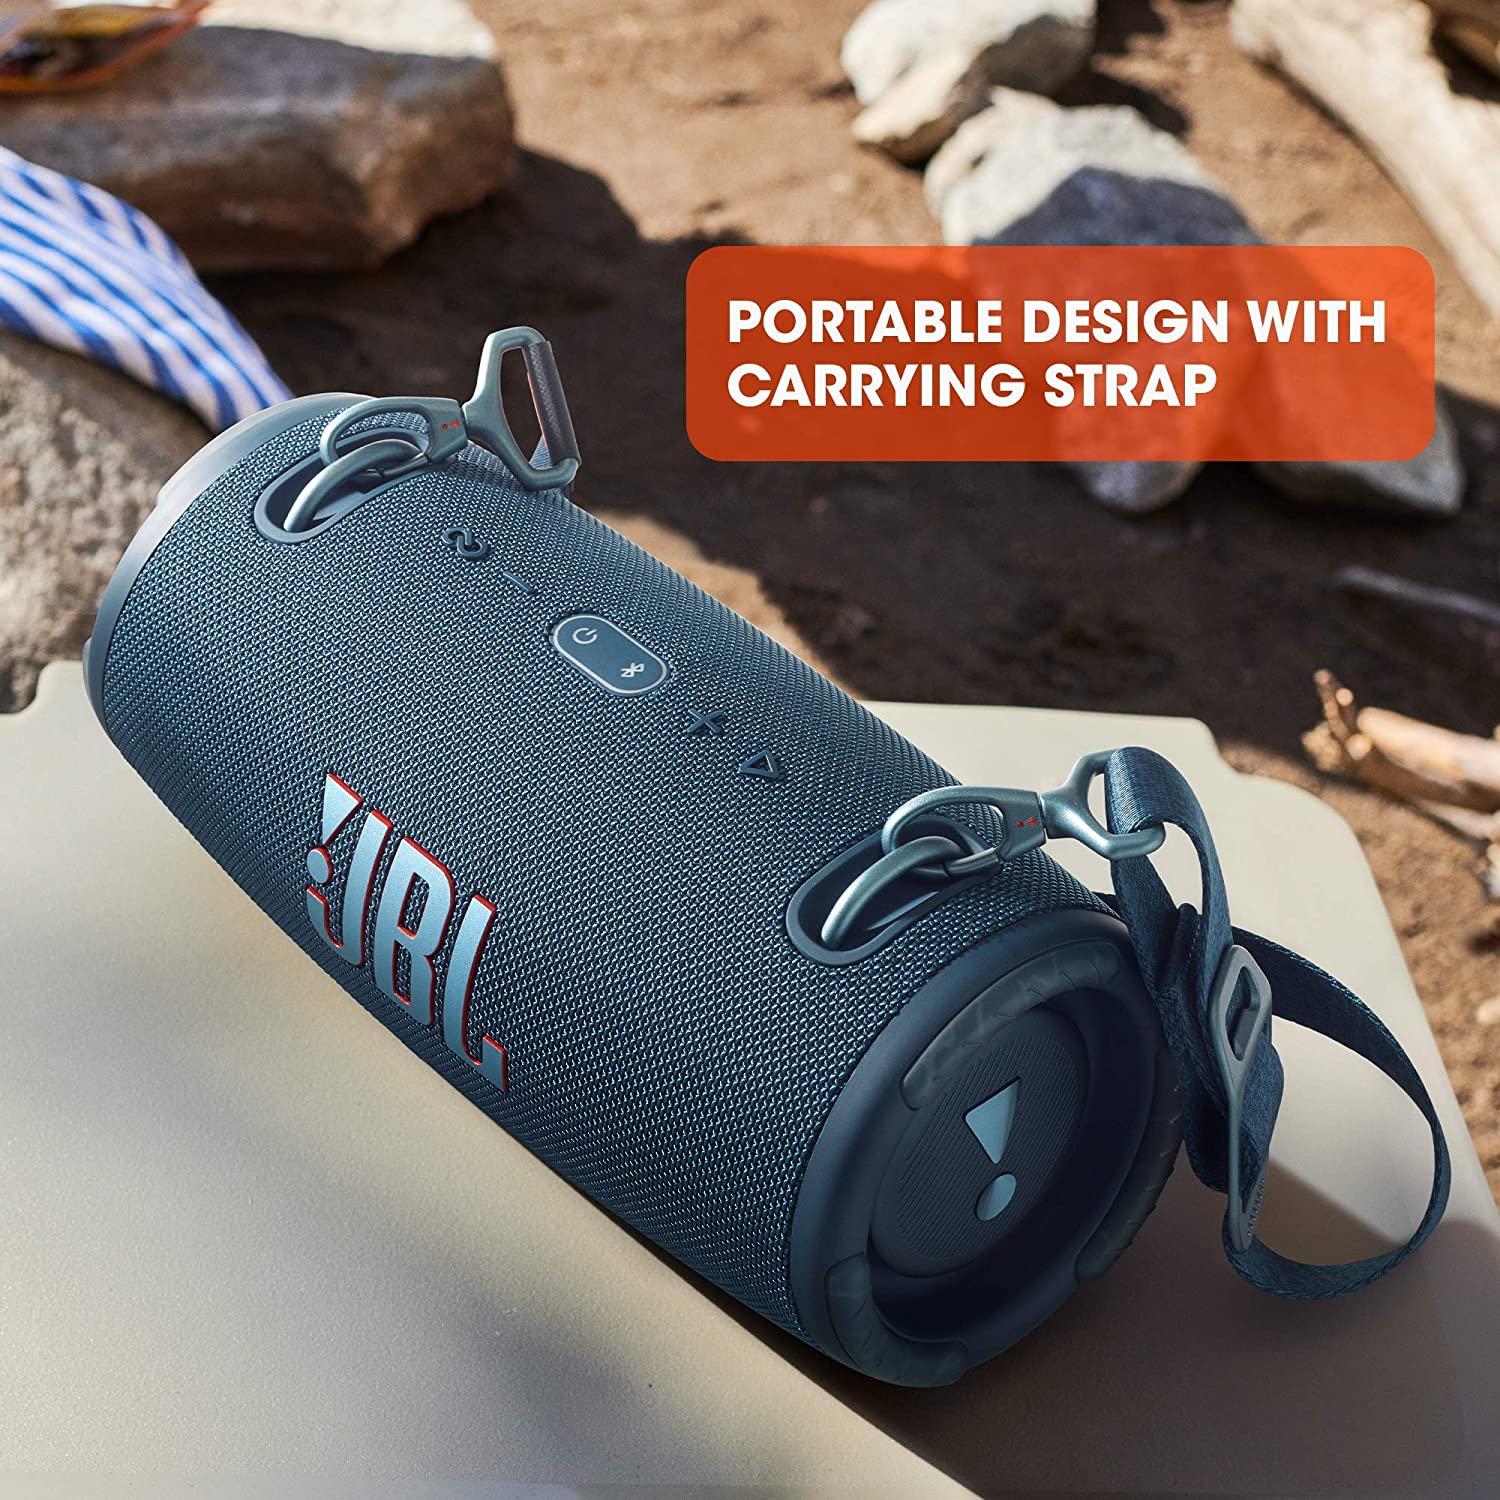 JBL Xtreme 3 - Portable Bluetooth Speaker, Powerful Sound and Deep Bass